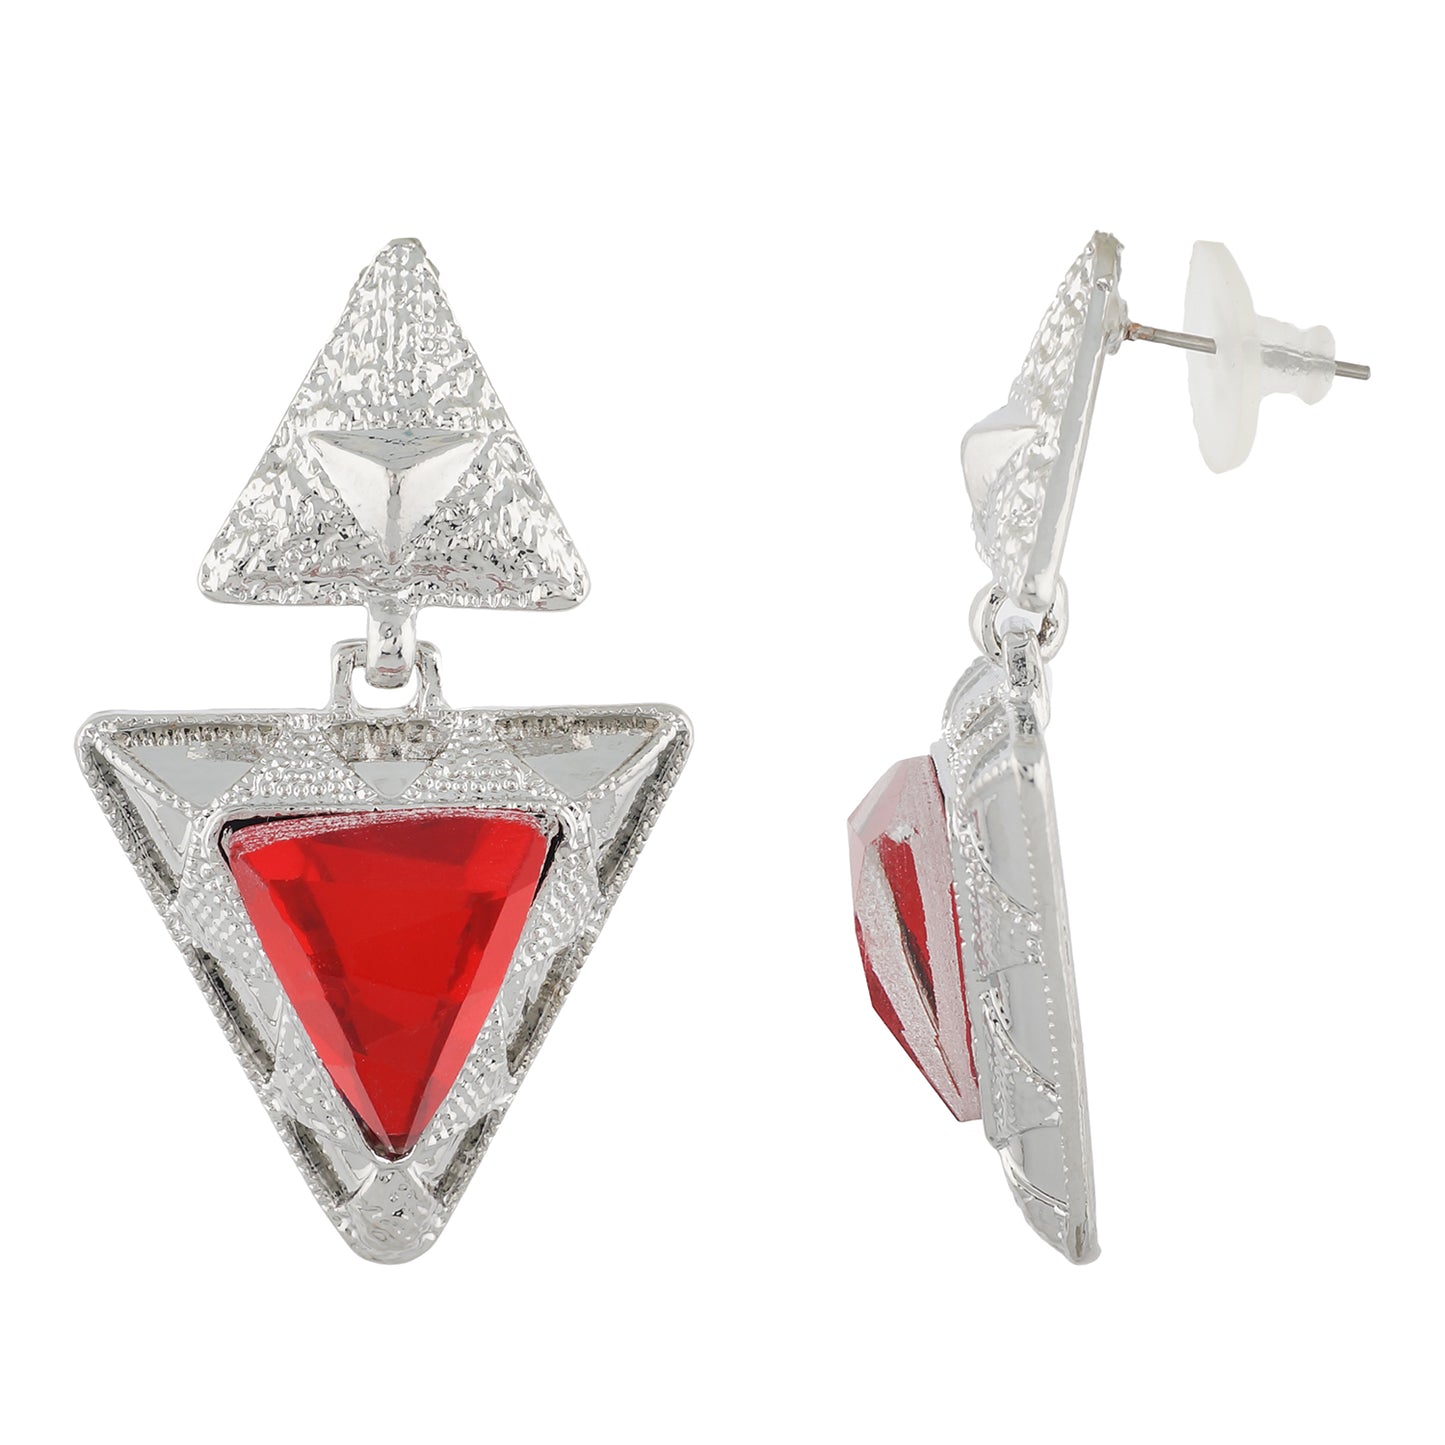 Red Colour Triangular Necklace and Earrings for Girls and Women